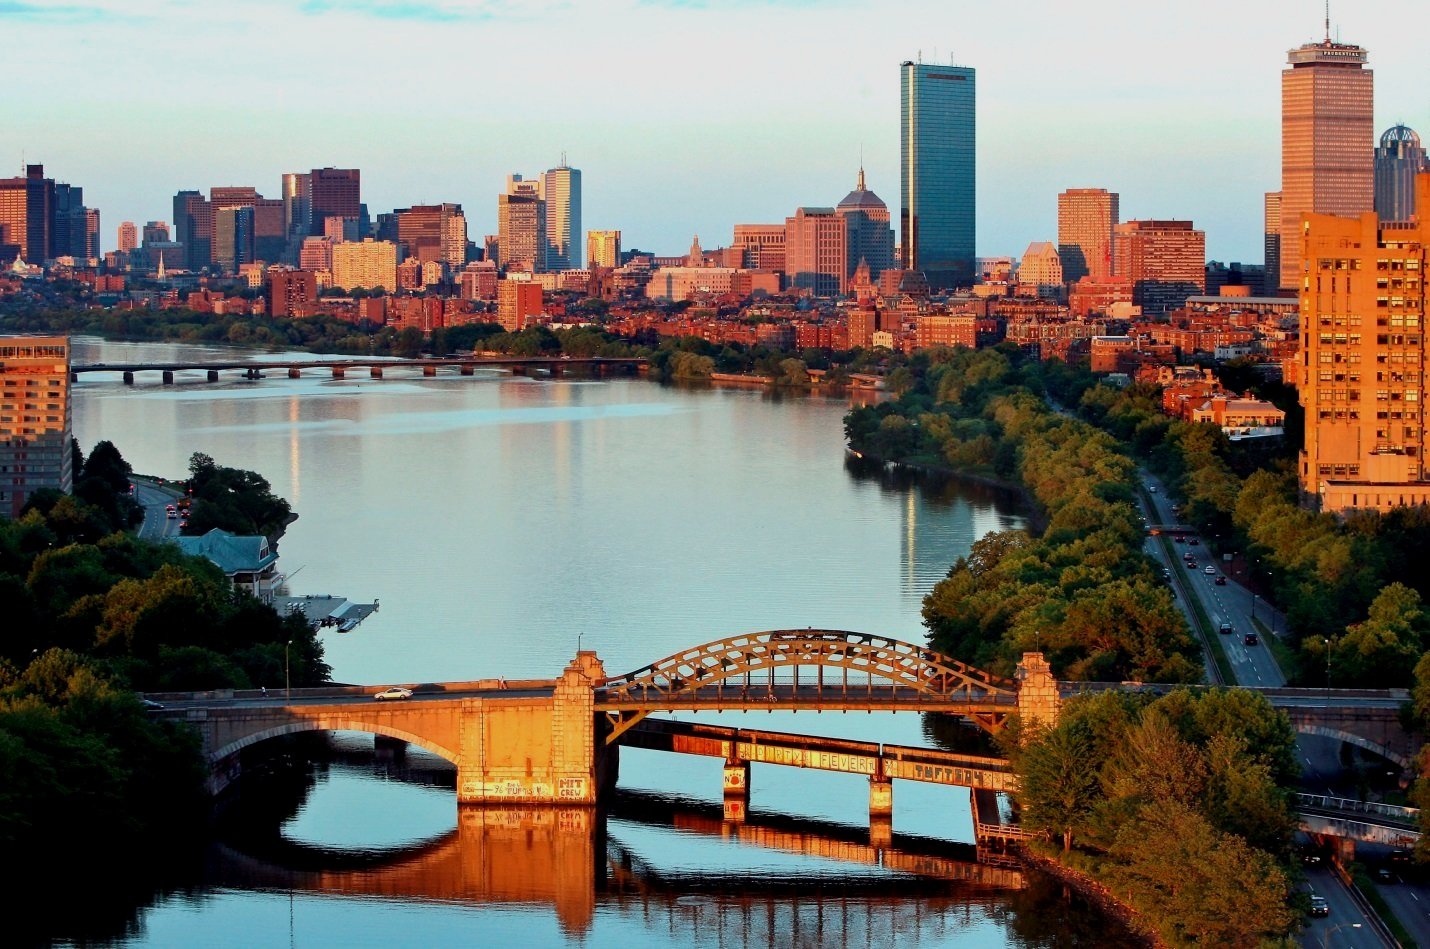 Charles River Watershed Association